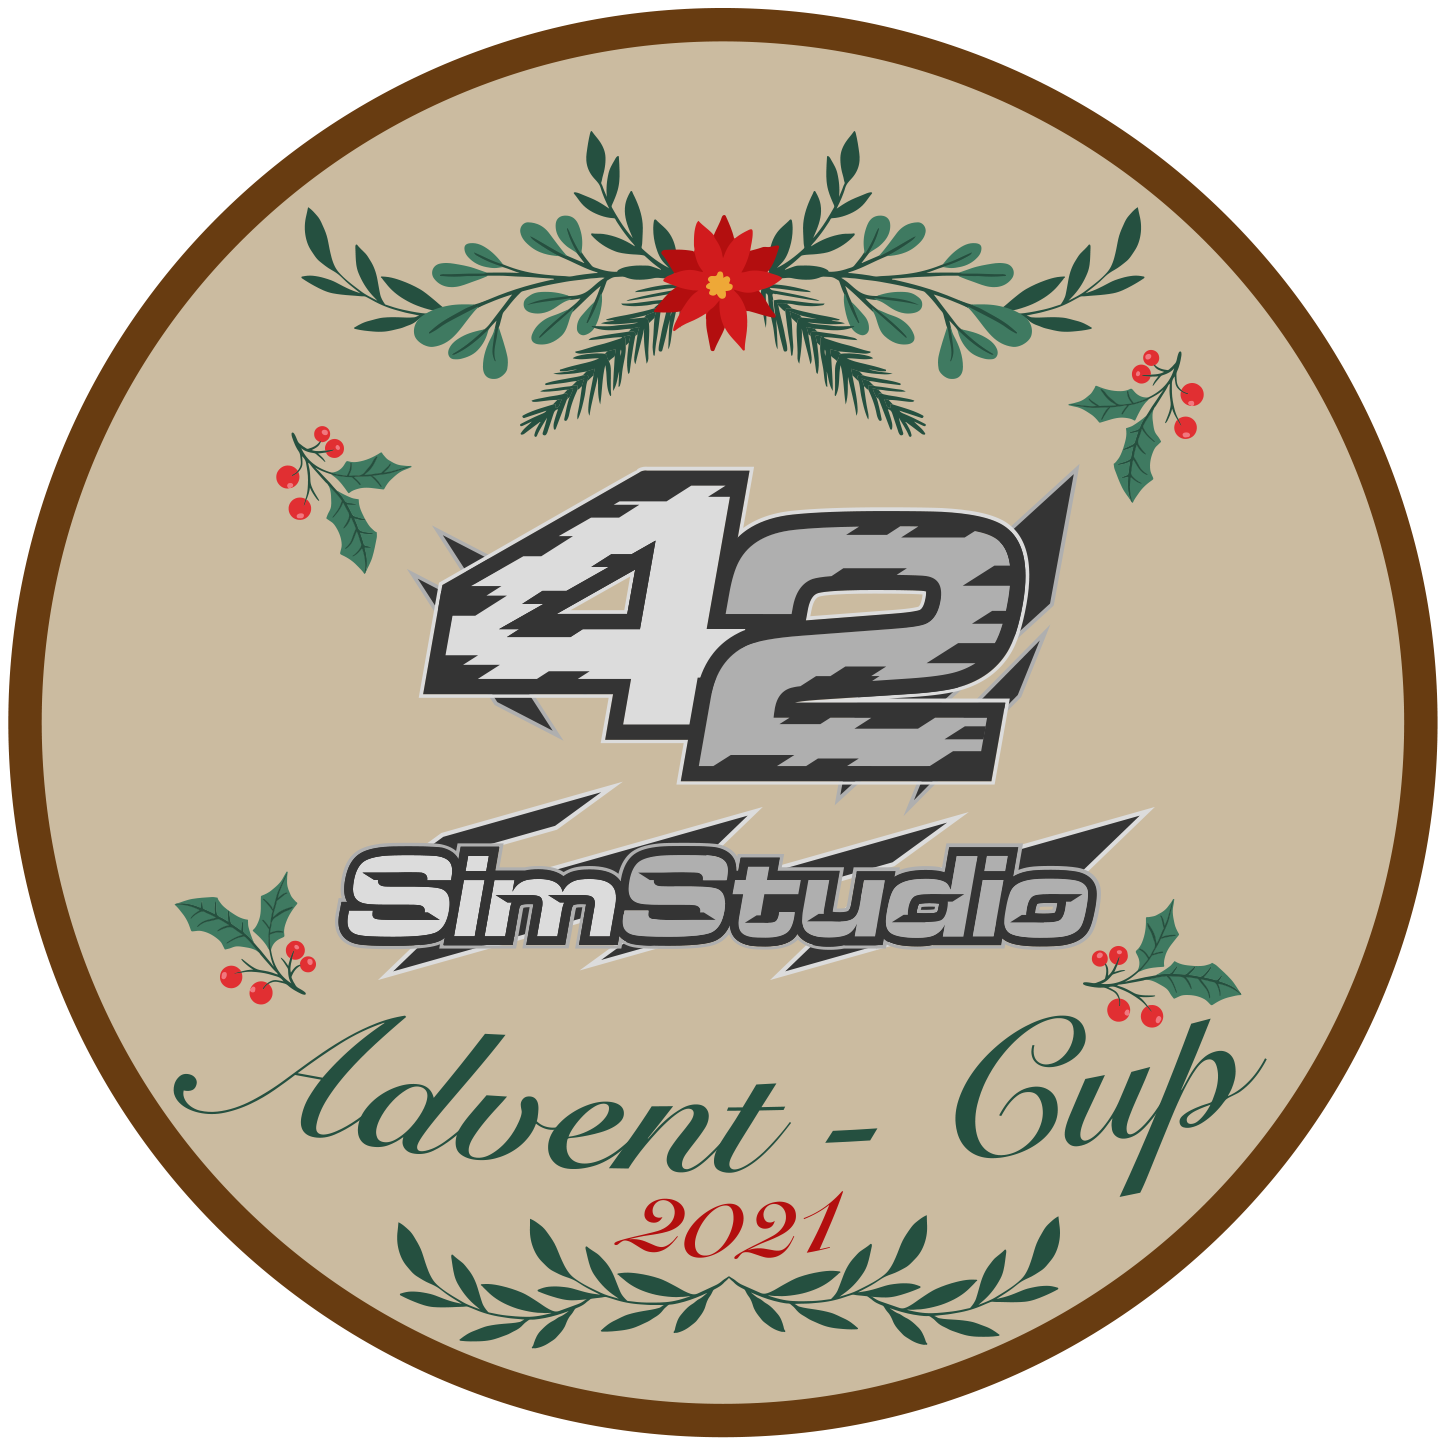 You are currently viewing Advent – Cup 2021